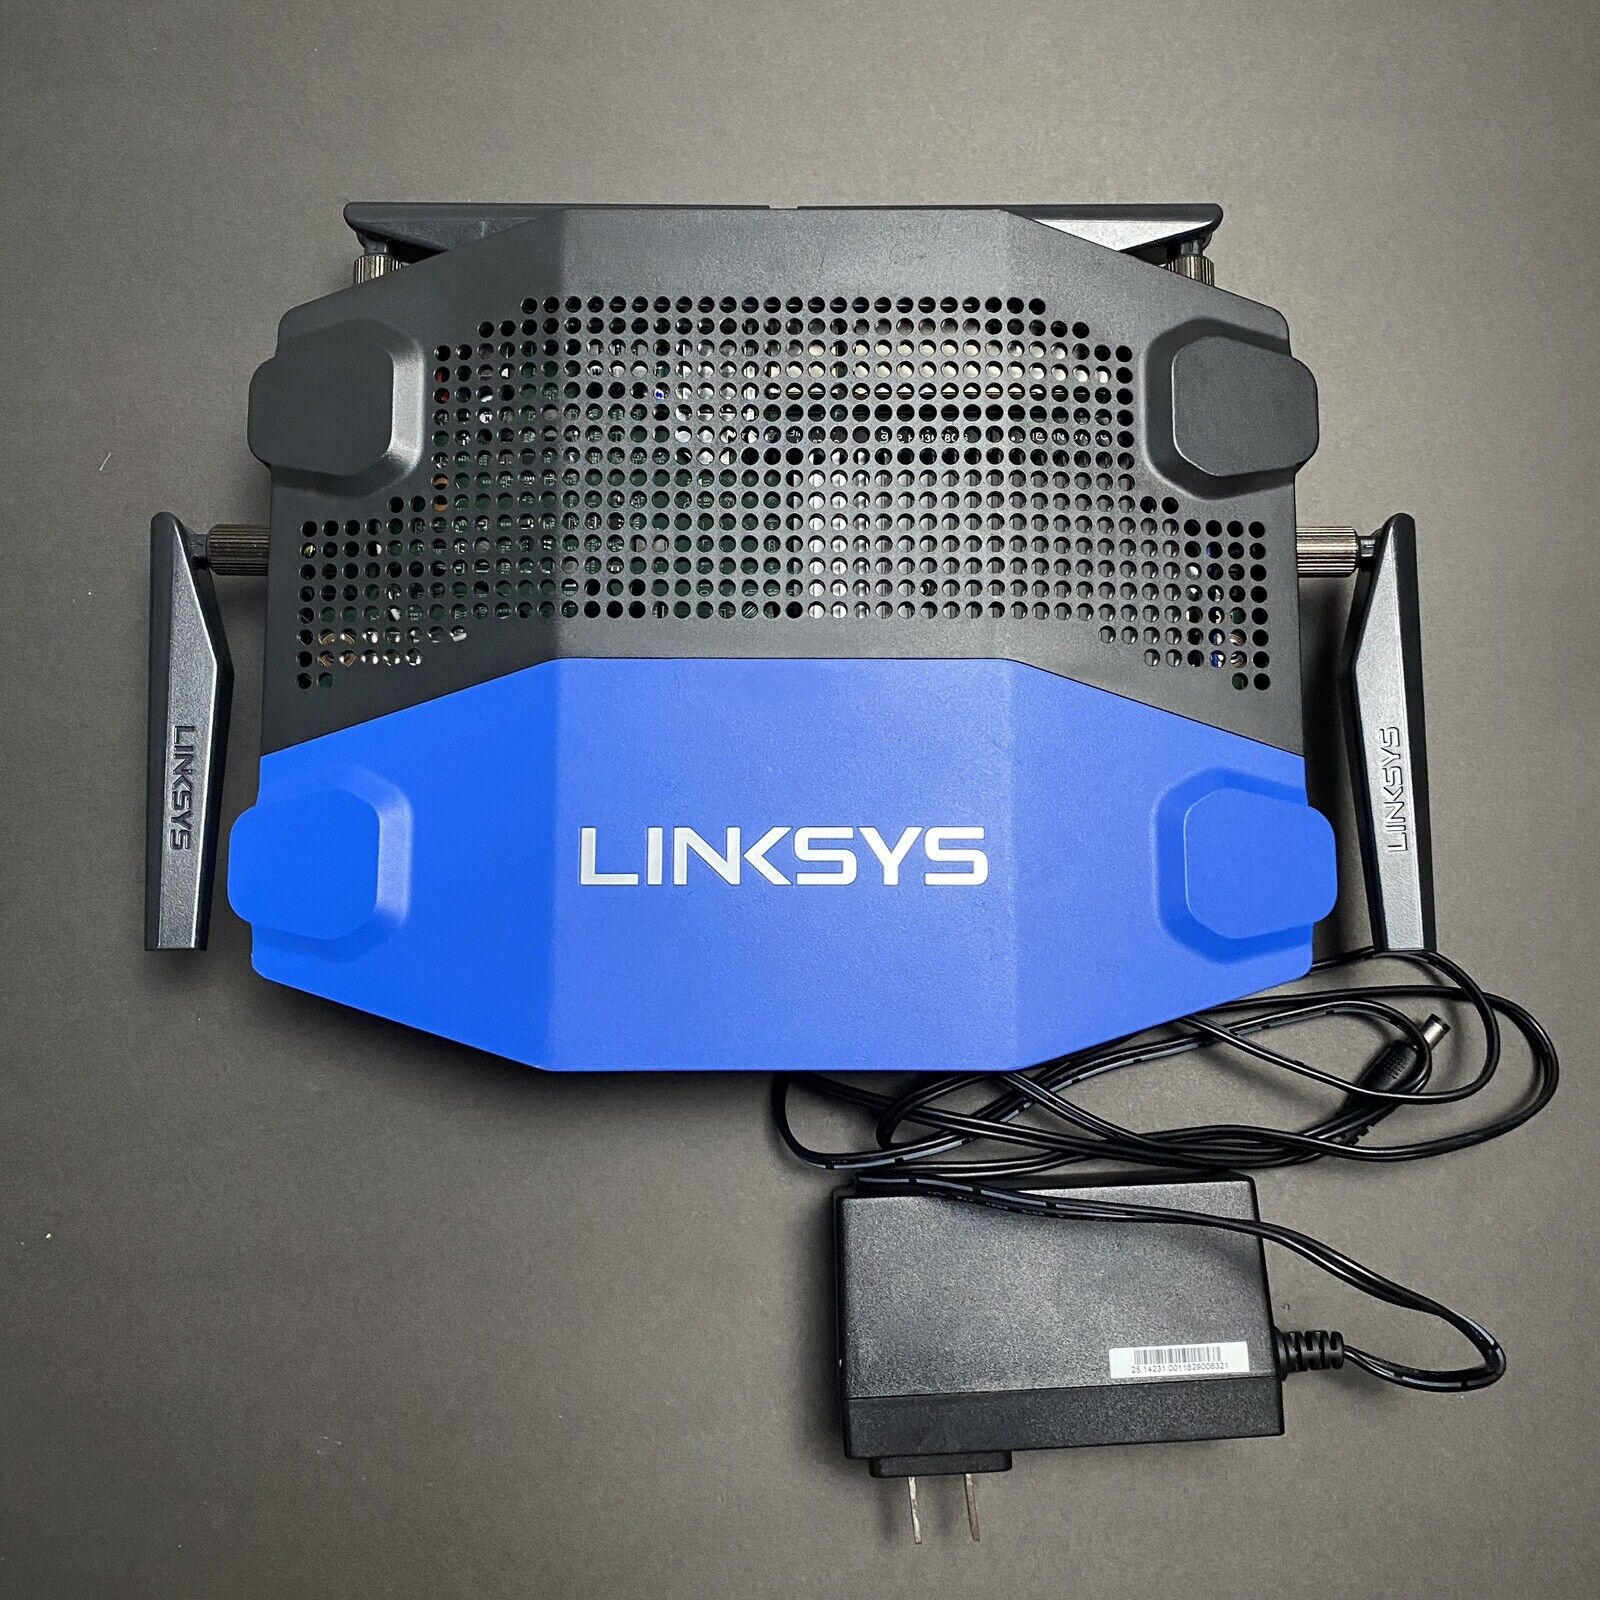 Linksys WRT3200ACM AC3200 Dual-Band Wi-Fi Router Gigabit Wireless Router, Tested